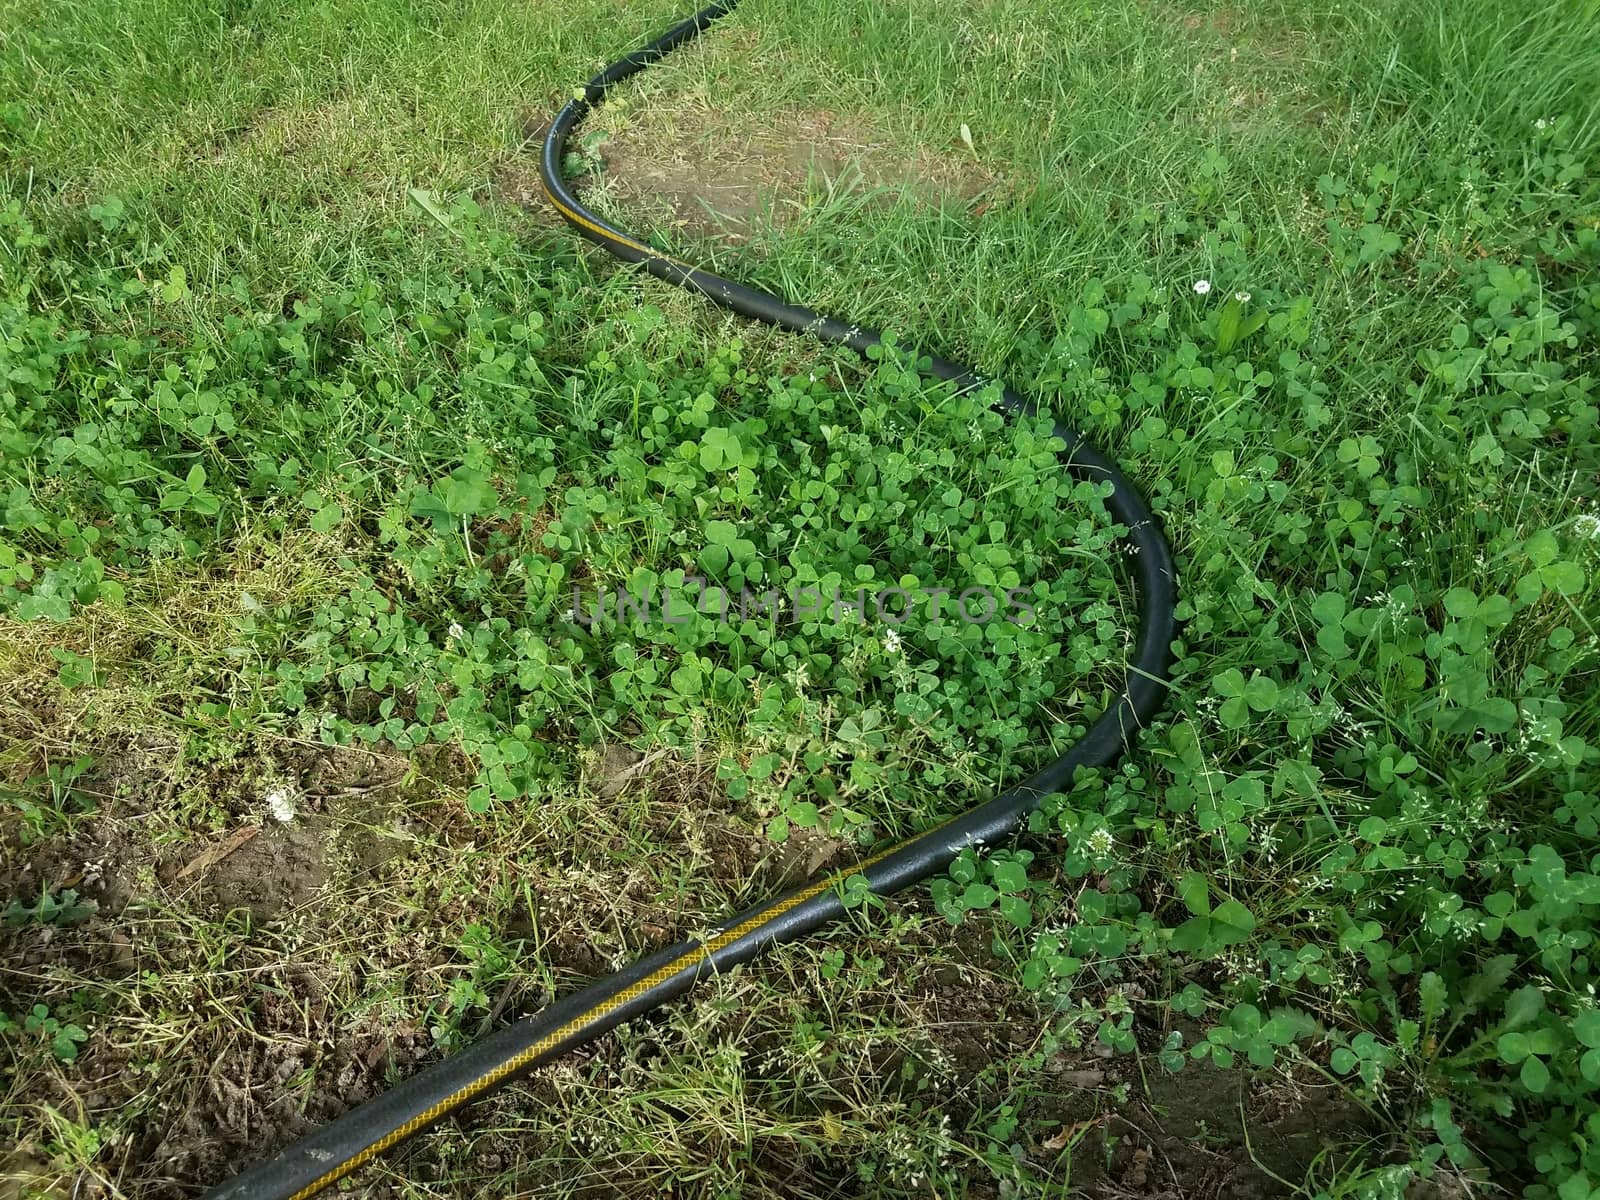 curved black garden hose on green grass or lawn by stockphotofan1